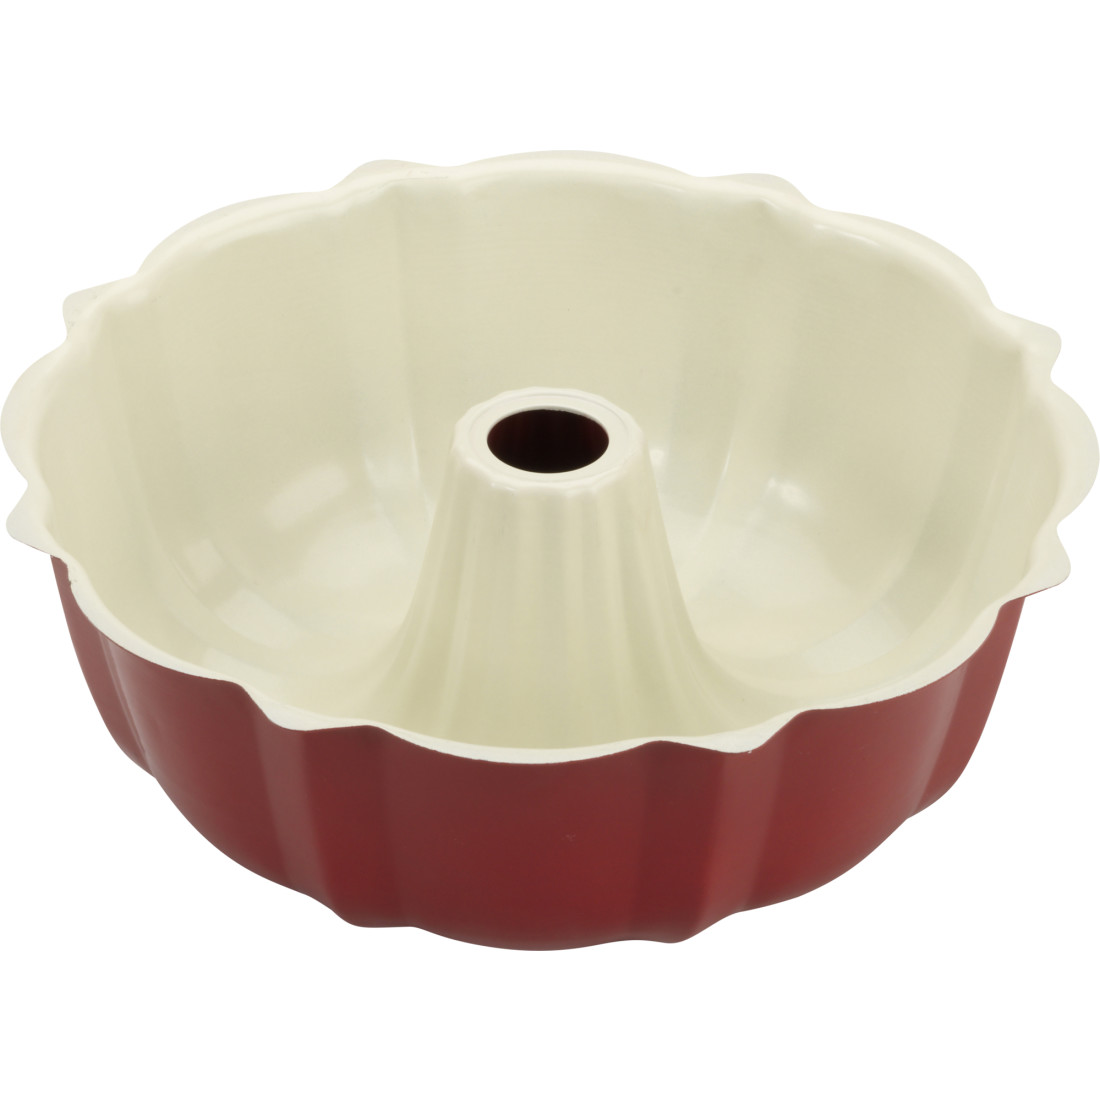  Wilton Recipe Right Non-Stick Fluted Tube Pan, 9.75-Inch: Bundt  Pans: Home & Kitchen